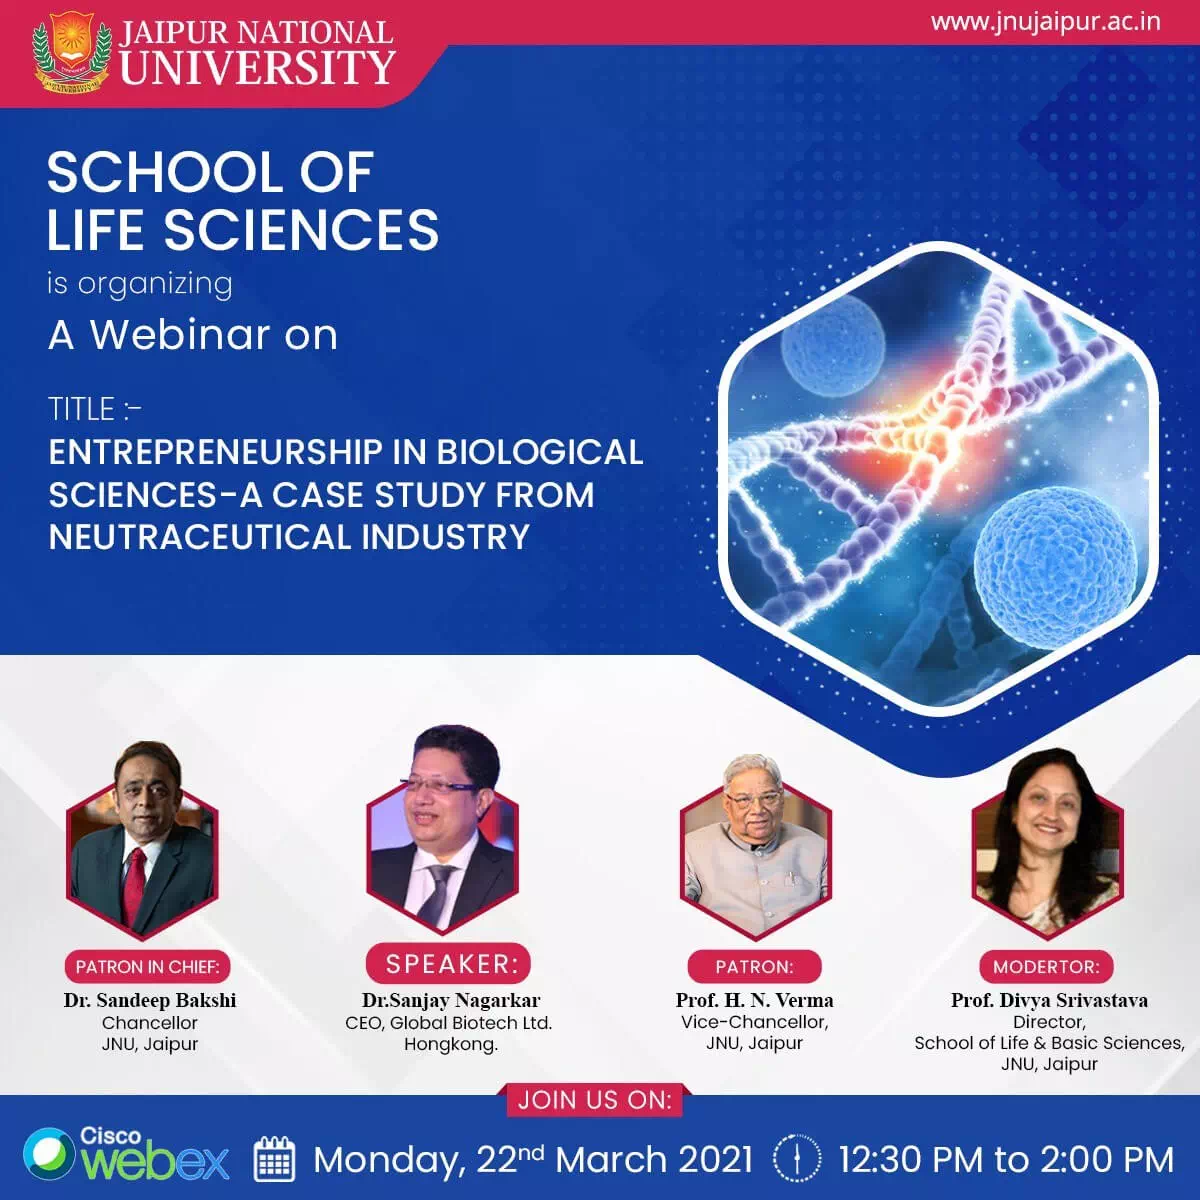 Webinar on “Entrepreneurship in biological sciences- A case study from neutraceutical industry”